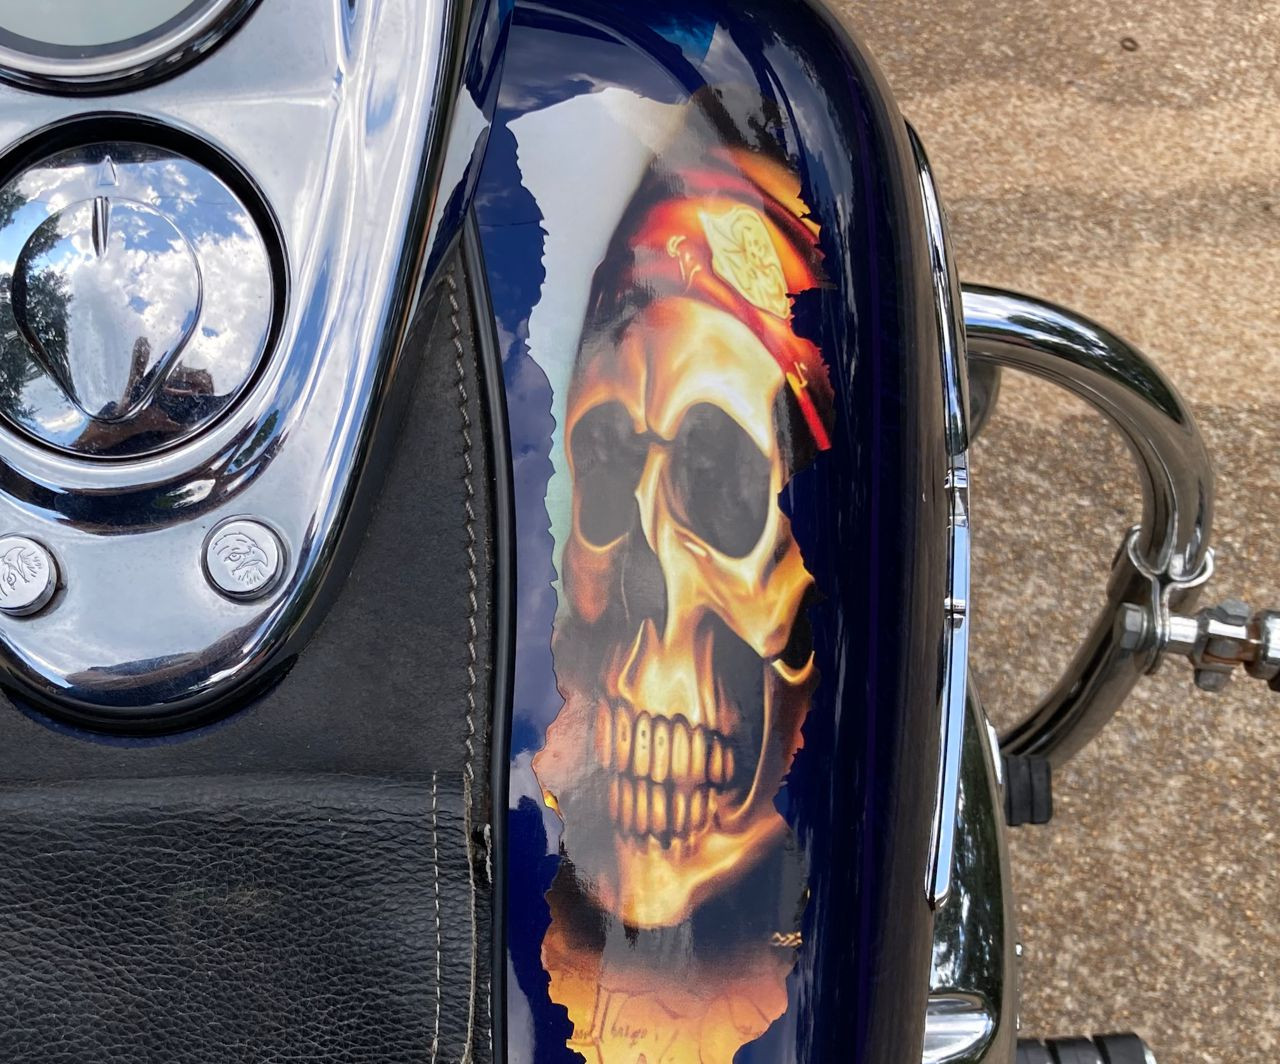 Harley Davidson Decals for Customizing Your Ride